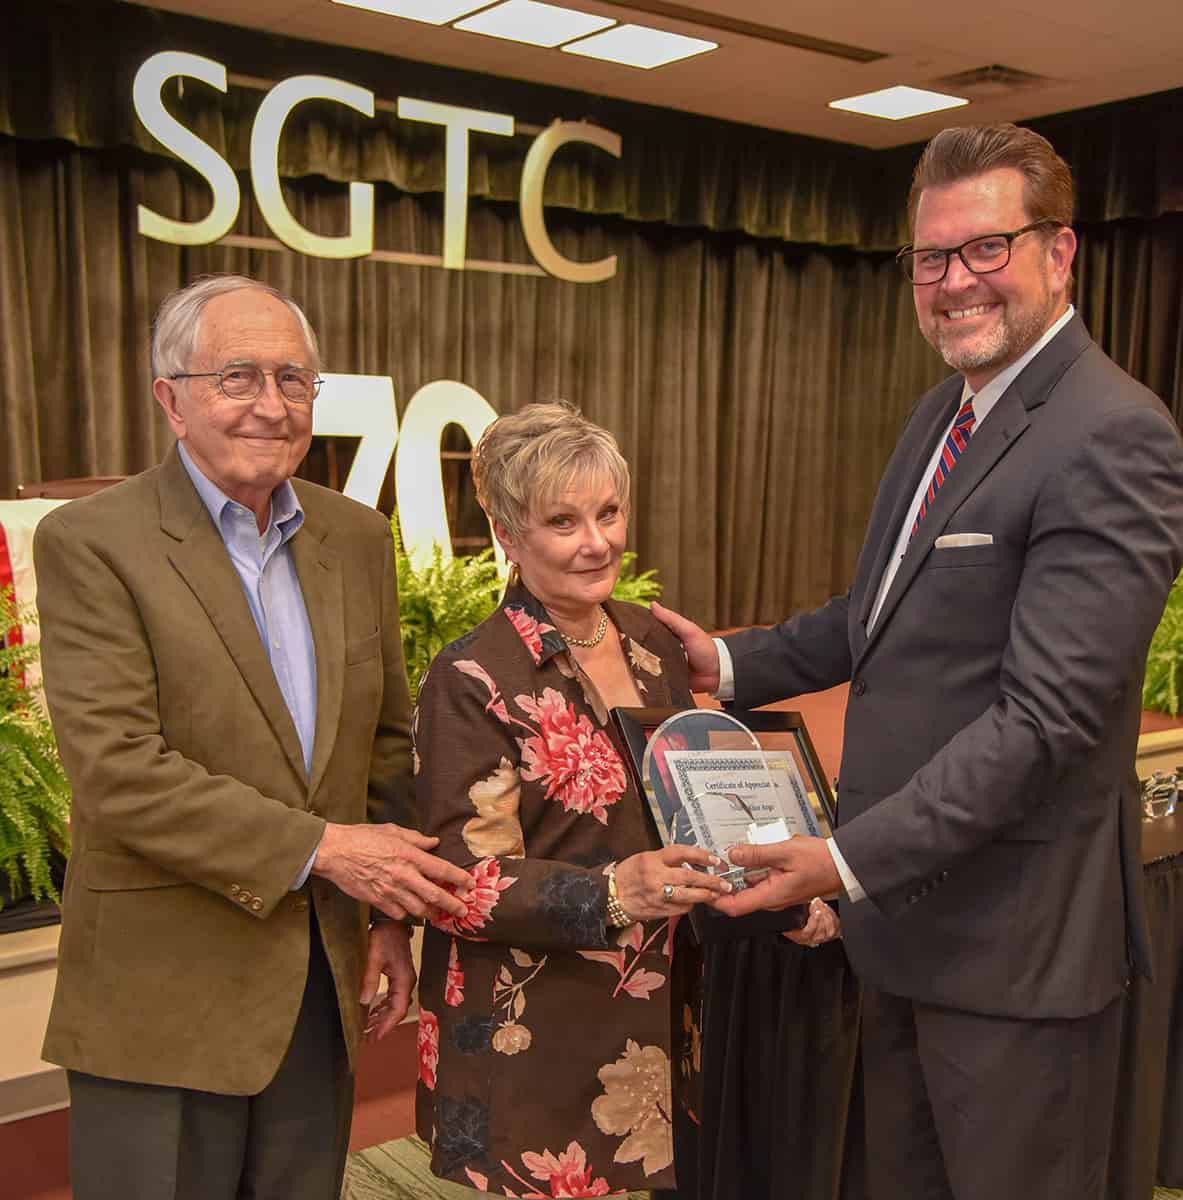 SGTC President Dr. John Watford is shown above (r) with John and Alice Argo who were recognized at the SGTC Foundation Donor Dinner for being members of the Scholars Club for their life time giving. The Argo’s also endowed the John and Alice Argo Aviation Maintenance scholarship for aviation students at South Georgia Tech. They were also recognized as members of the 2018 President’s Club.